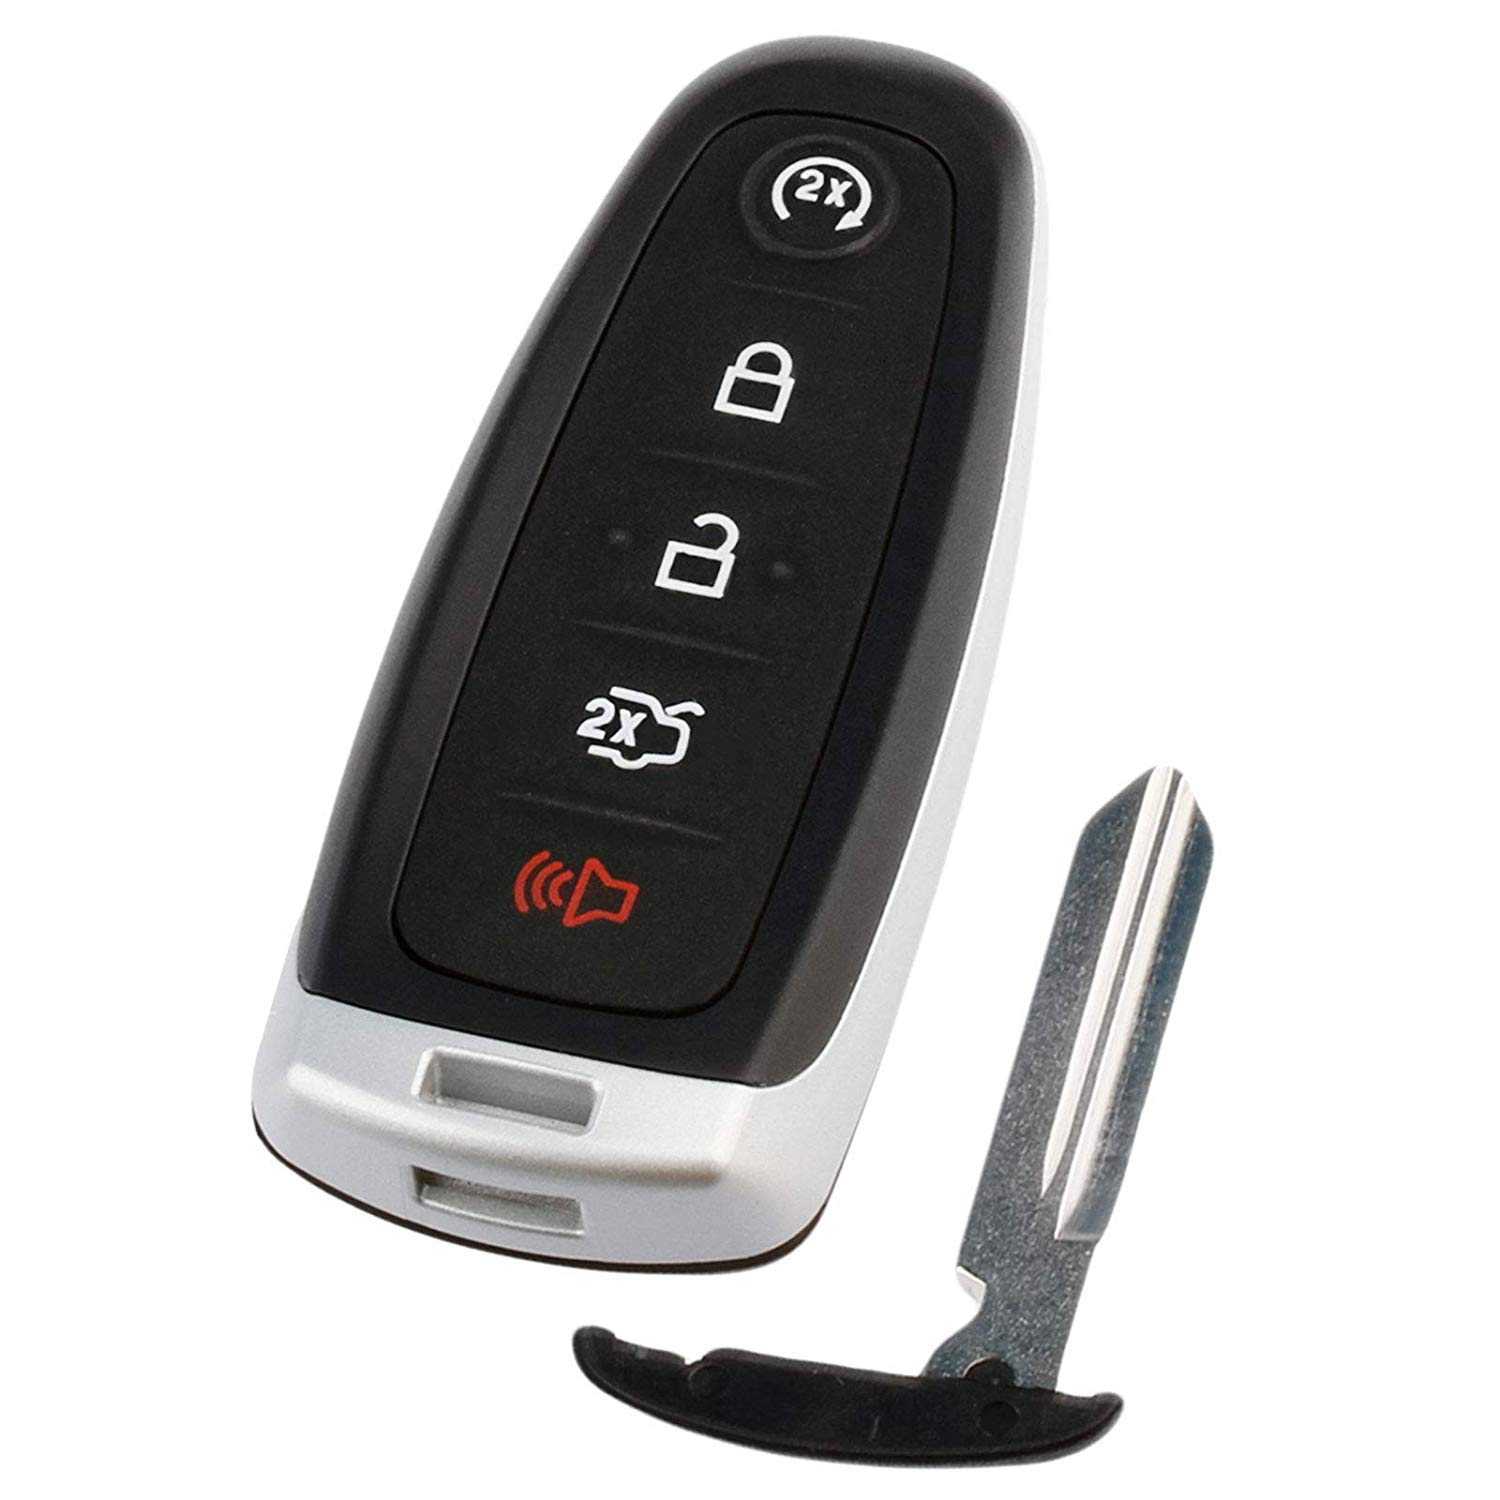 What Is The Difference Between KEYLESS START® and KEYLESS GO